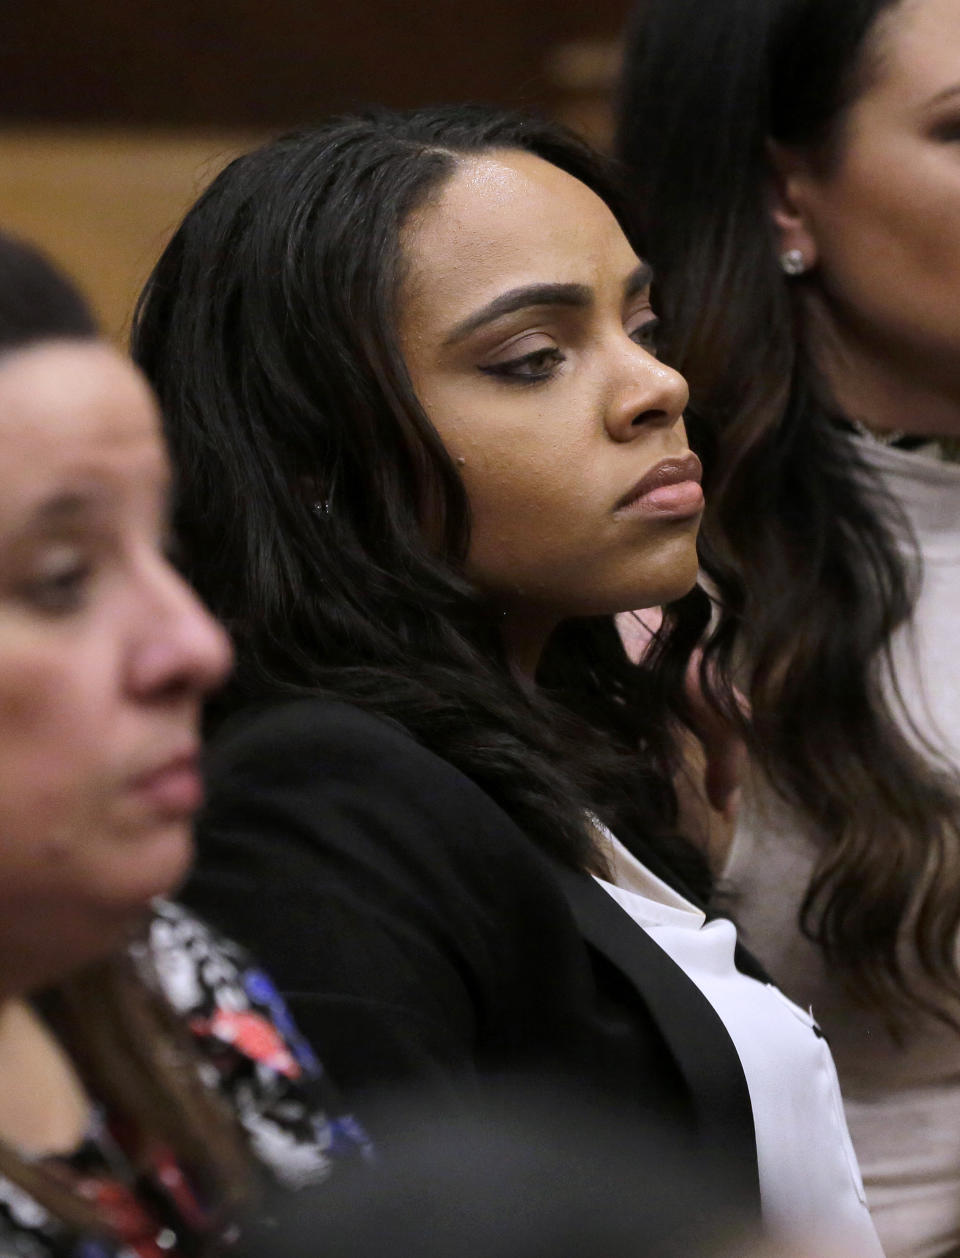 Shayanna Jenkins-Hernandez, fiancee of former New England Patriots tight end Aaron Hernandez, sits in the courtroom during the trial for Hernandez at Suffolk Superior Court, Thursday, April 6, 2017, in Boston. Hernandez is on trial for the July 2012 killings of Daniel de Abreu and Safiro Furtado who he encountered in a Boston nightclub. The former NFL player is already serving a life sentence in the 2013 killing of semi-professional football player Odin Lloyd. (AP Photo/Steven Senne, Pool)